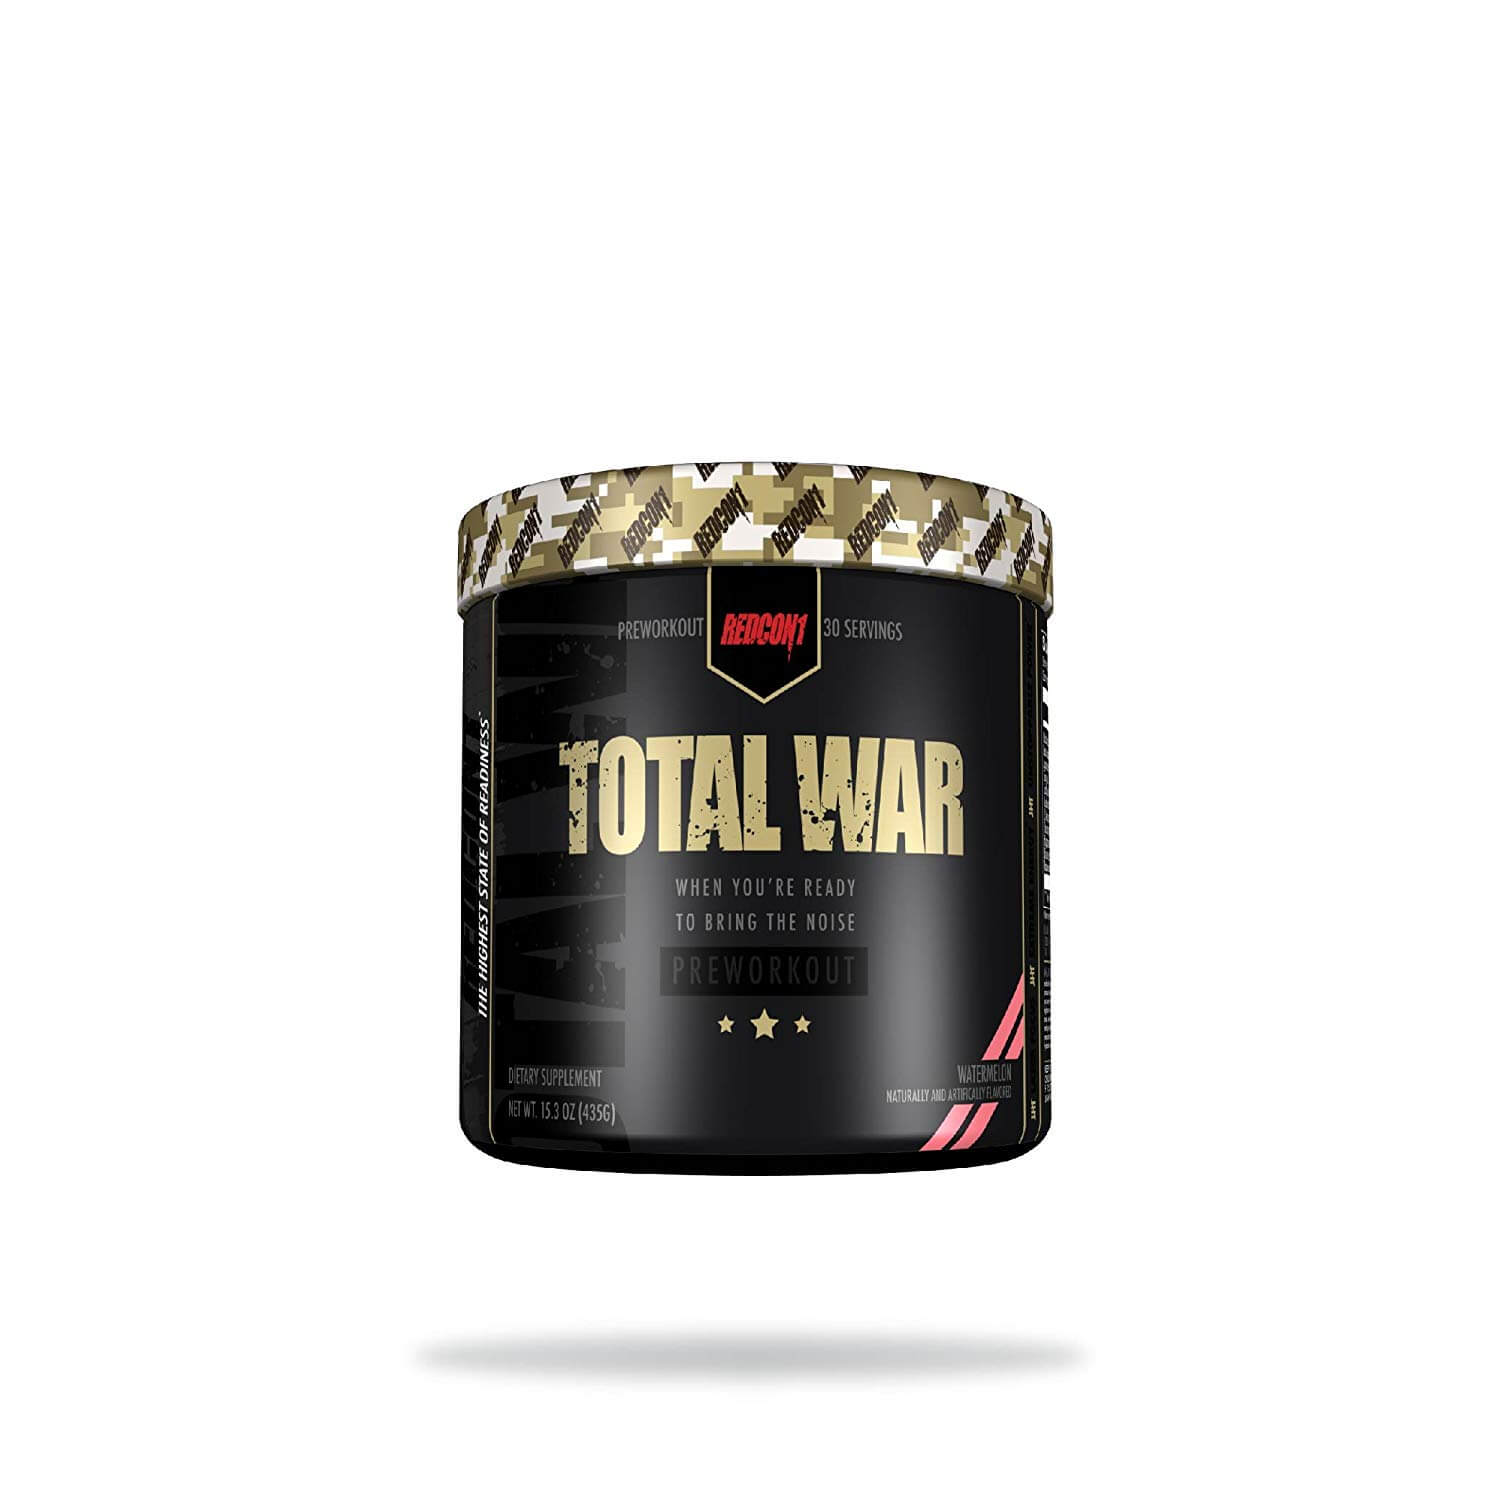 28 Full Body Total war pre workout review 2018 at Home